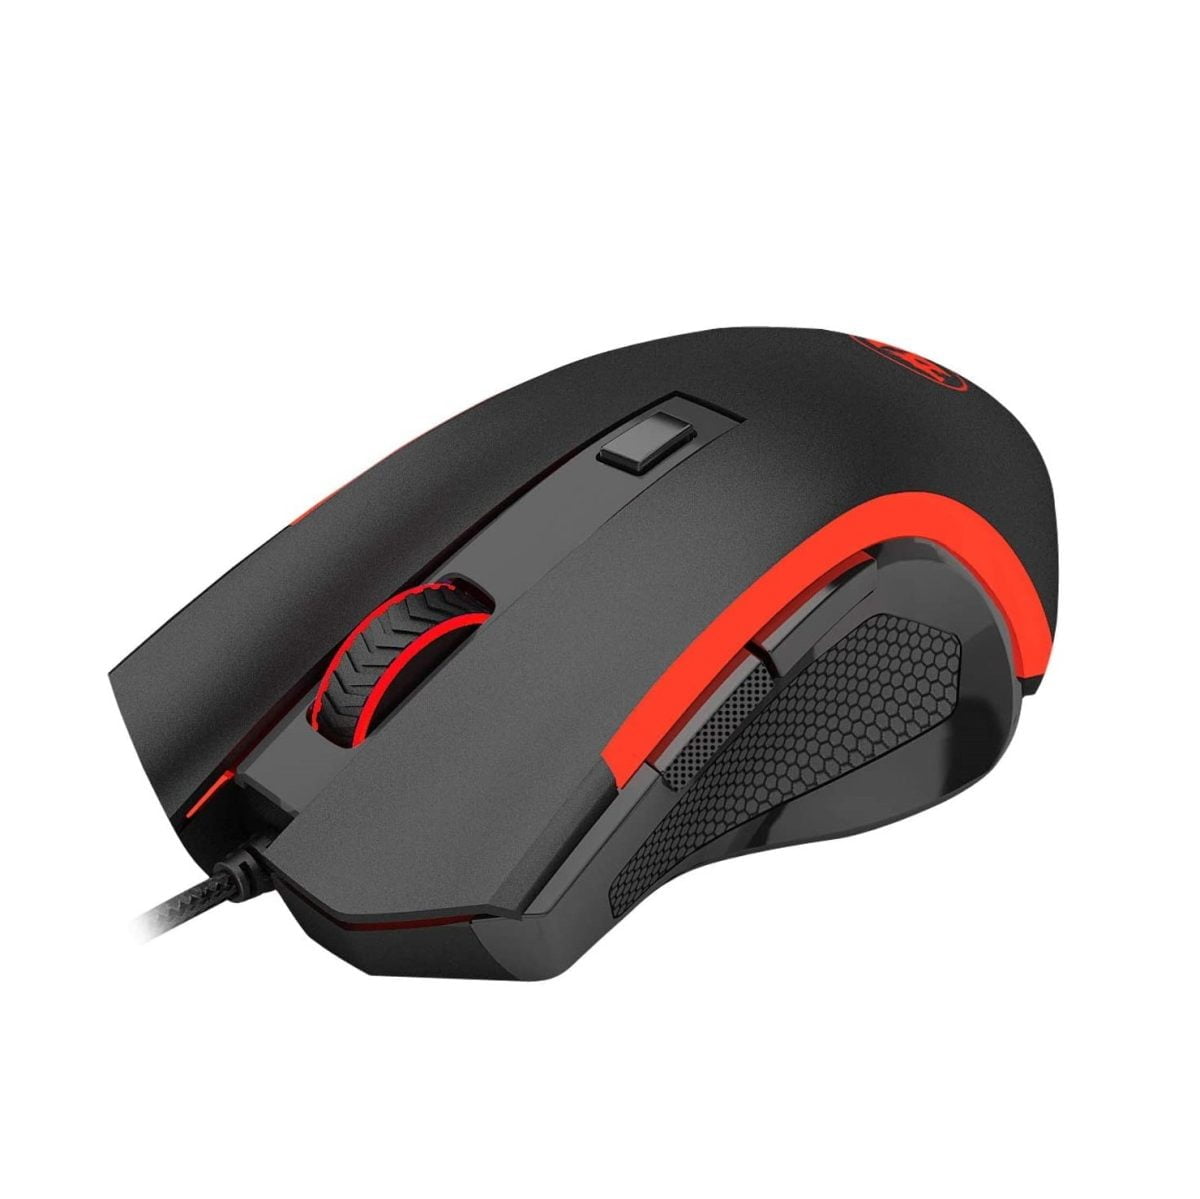 613Ine3Di0L. Ac Sl1500 Redragon &Lt;H1 Id=&Quot;Title&Quot; Class=&Quot;A-Size-Large A-Spacing-None&Quot;&Gt;Redragon M606 Nothosaur Usb Gaming Mouse&Lt;/H1&Gt; &Lt;Table Class=&Quot;A-Normal A-Spacing-Micro&Quot;&Gt; &Lt;Tbody&Gt; &Lt;Tr Class=&Quot;A-Spacing-Small Po-Connectivity_Technology&Quot;&Gt; &Lt;Td Class=&Quot;A-Span3&Quot;&Gt;&Lt;Span Class=&Quot;A-Size-Base A-Text-Bold&Quot;&Gt;Connectivity Technology&Lt;/Span&Gt;&Lt;/Td&Gt; &Lt;Td Class=&Quot;A-Span9&Quot;&Gt;&Lt;Span Class=&Quot;A-Size-Base&Quot;&Gt;Usb&Lt;/Span&Gt;&Lt;/Td&Gt; &Lt;/Tr&Gt; &Lt;Tr Class=&Quot;A-Spacing-Small Po-Recommended_Uses_For_Product&Quot;&Gt; &Lt;Td Class=&Quot;A-Span3&Quot;&Gt;&Lt;Span Class=&Quot;A-Size-Base A-Text-Bold&Quot;&Gt;Recommended Uses For Product&Lt;/Span&Gt;&Lt;/Td&Gt; &Lt;Td Class=&Quot;A-Span9&Quot;&Gt;&Lt;Span Class=&Quot;A-Size-Base&Quot;&Gt;Gaming&Lt;/Span&Gt;&Lt;/Td&Gt; &Lt;/Tr&Gt; &Lt;Tr Class=&Quot;A-Spacing-Small Po-Brand&Quot;&Gt; &Lt;Td Class=&Quot;A-Span3&Quot;&Gt;&Lt;Span Class=&Quot;A-Size-Base A-Text-Bold&Quot;&Gt;Brand&Lt;/Span&Gt;&Lt;/Td&Gt; &Lt;Td Class=&Quot;A-Span9&Quot;&Gt;&Lt;Span Class=&Quot;A-Size-Base&Quot;&Gt;Redragon&Lt;/Span&Gt;&Lt;/Td&Gt; &Lt;/Tr&Gt; &Lt;Tr Class=&Quot;A-Spacing-Small Po-Movement_Detection_Technology&Quot;&Gt; &Lt;Td Class=&Quot;A-Span3&Quot;&Gt;&Lt;Span Class=&Quot;A-Size-Base A-Text-Bold&Quot;&Gt;Movement Detection Technology&Lt;/Span&Gt;&Lt;/Td&Gt; &Lt;Td Class=&Quot;A-Span9&Quot;&Gt;&Lt;Span Class=&Quot;A-Size-Base&Quot;&Gt;Optical&Lt;/Span&Gt;&Lt;/Td&Gt; &Lt;/Tr&Gt; &Lt;Tr Class=&Quot;A-Spacing-Small Po-Color&Quot;&Gt; &Lt;Td Class=&Quot;A-Span3&Quot;&Gt;&Lt;Span Class=&Quot;A-Size-Base A-Text-Bold&Quot;&Gt;Colour&Lt;/Span&Gt;&Lt;/Td&Gt; &Lt;Td Class=&Quot;A-Span9&Quot;&Gt;&Lt;Span Class=&Quot;A-Size-Base&Quot;&Gt;Black&Lt;/Span&Gt;&Lt;/Td&Gt; &Lt;/Tr&Gt; &Lt;/Tbody&Gt; &Lt;/Table&Gt; Gaming Mouse Redragon M606 Gaming Mouse